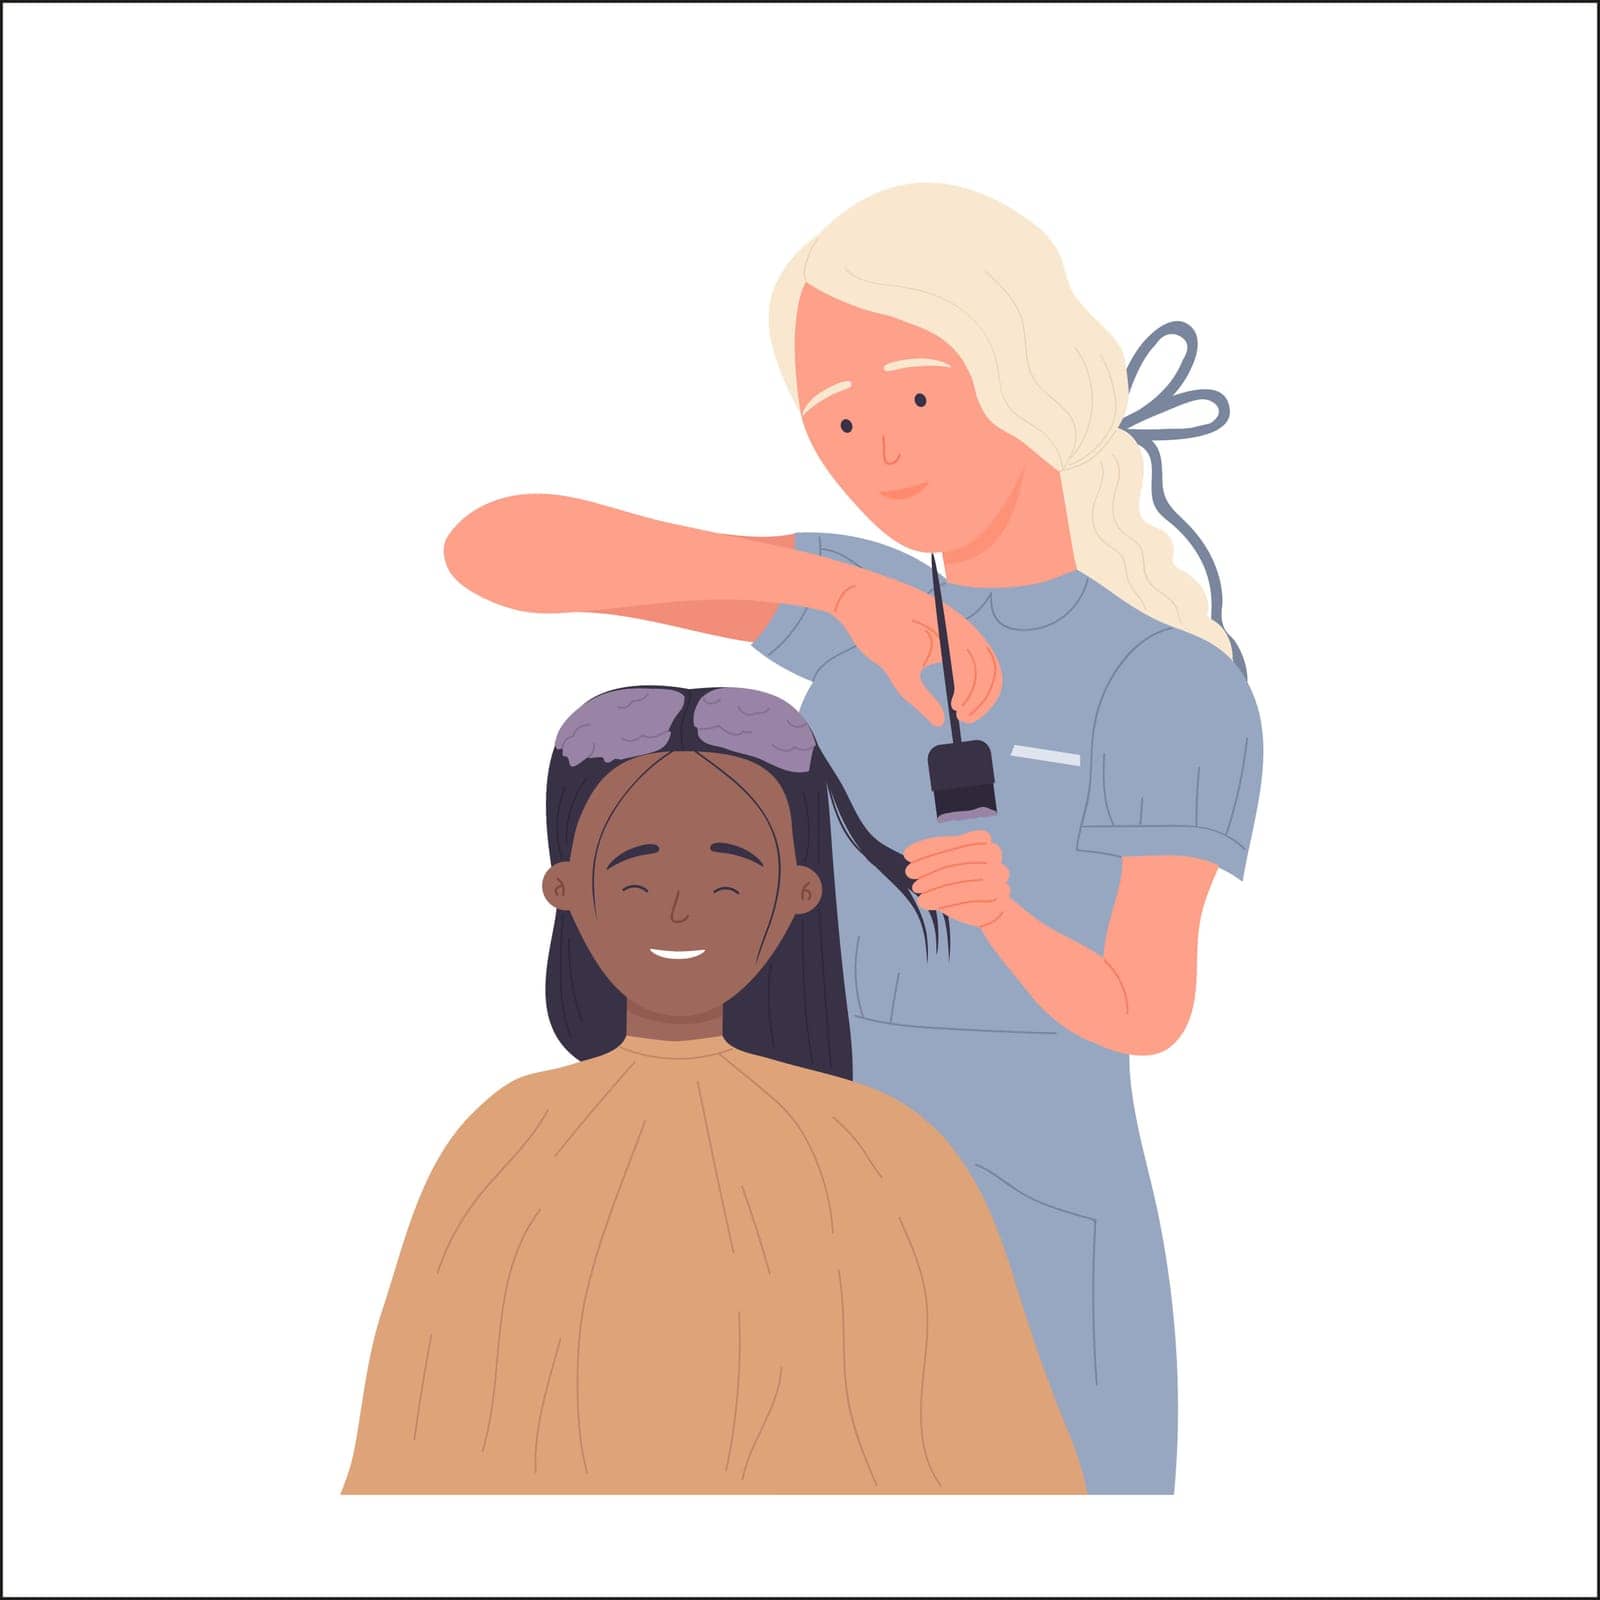 Professional hairdresser coloring the client hair. Beauty room with different care treatments service flat vector illustration